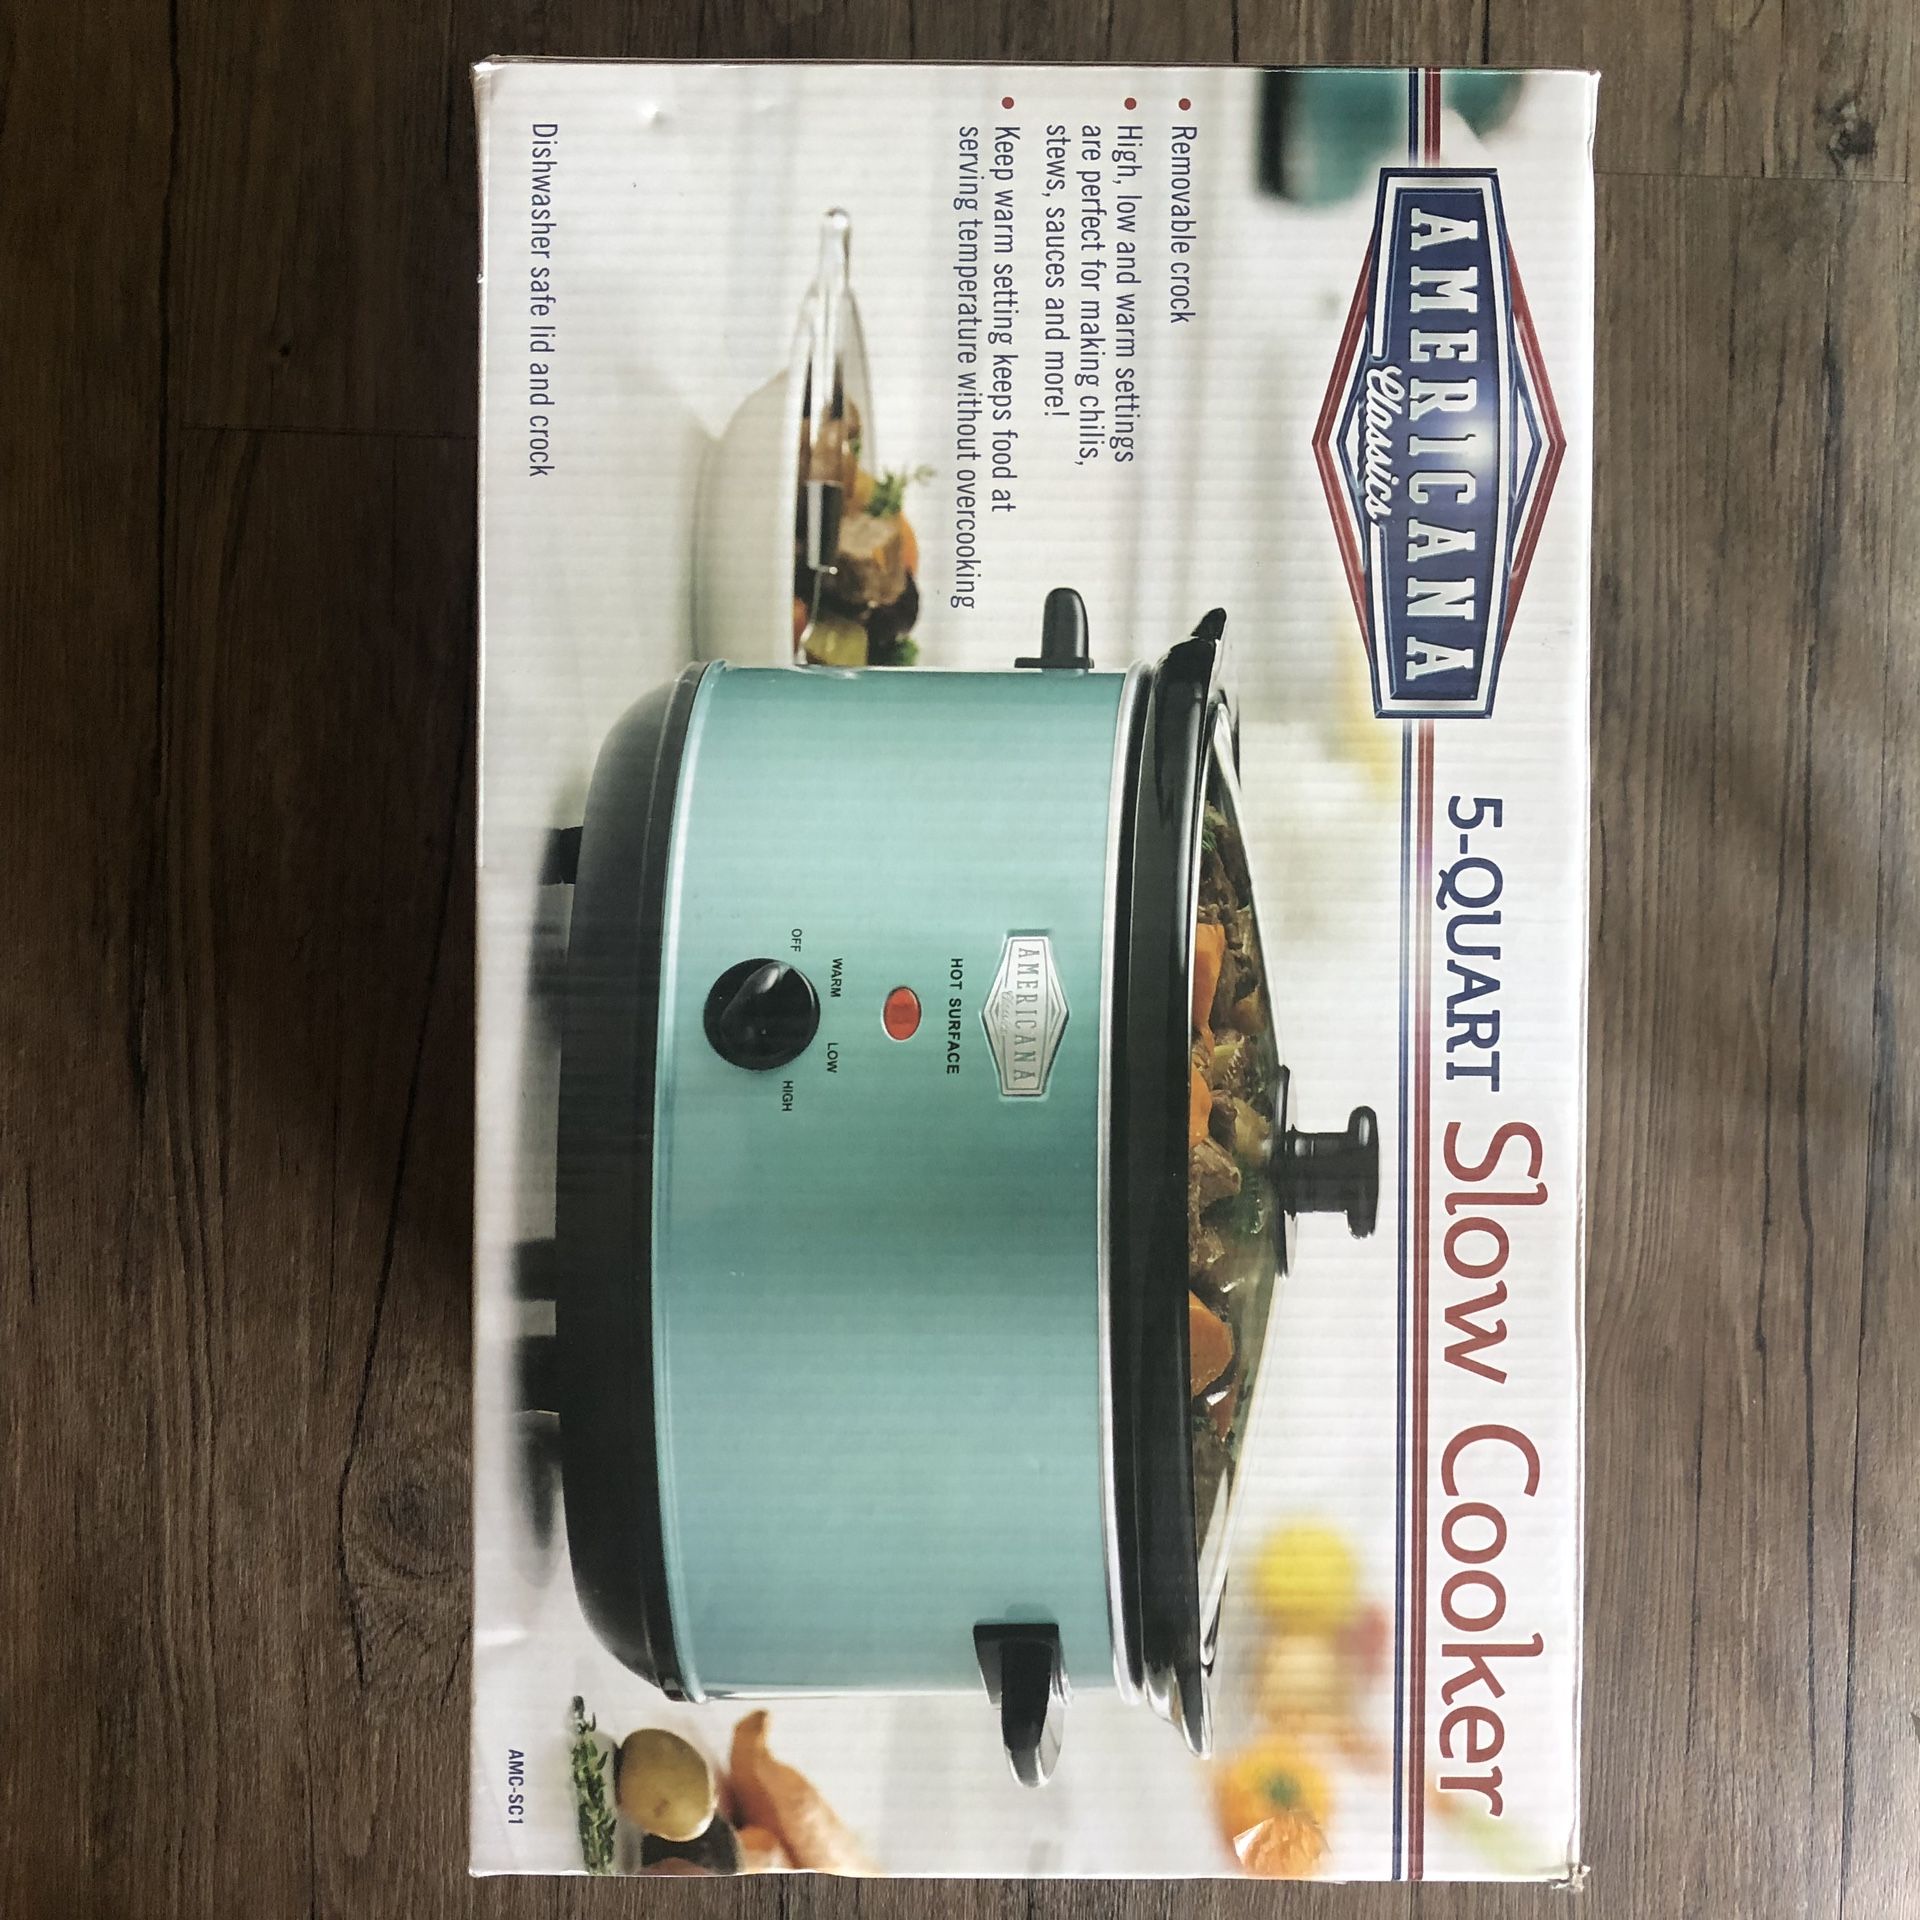 Never opened American Classic Slow cooker